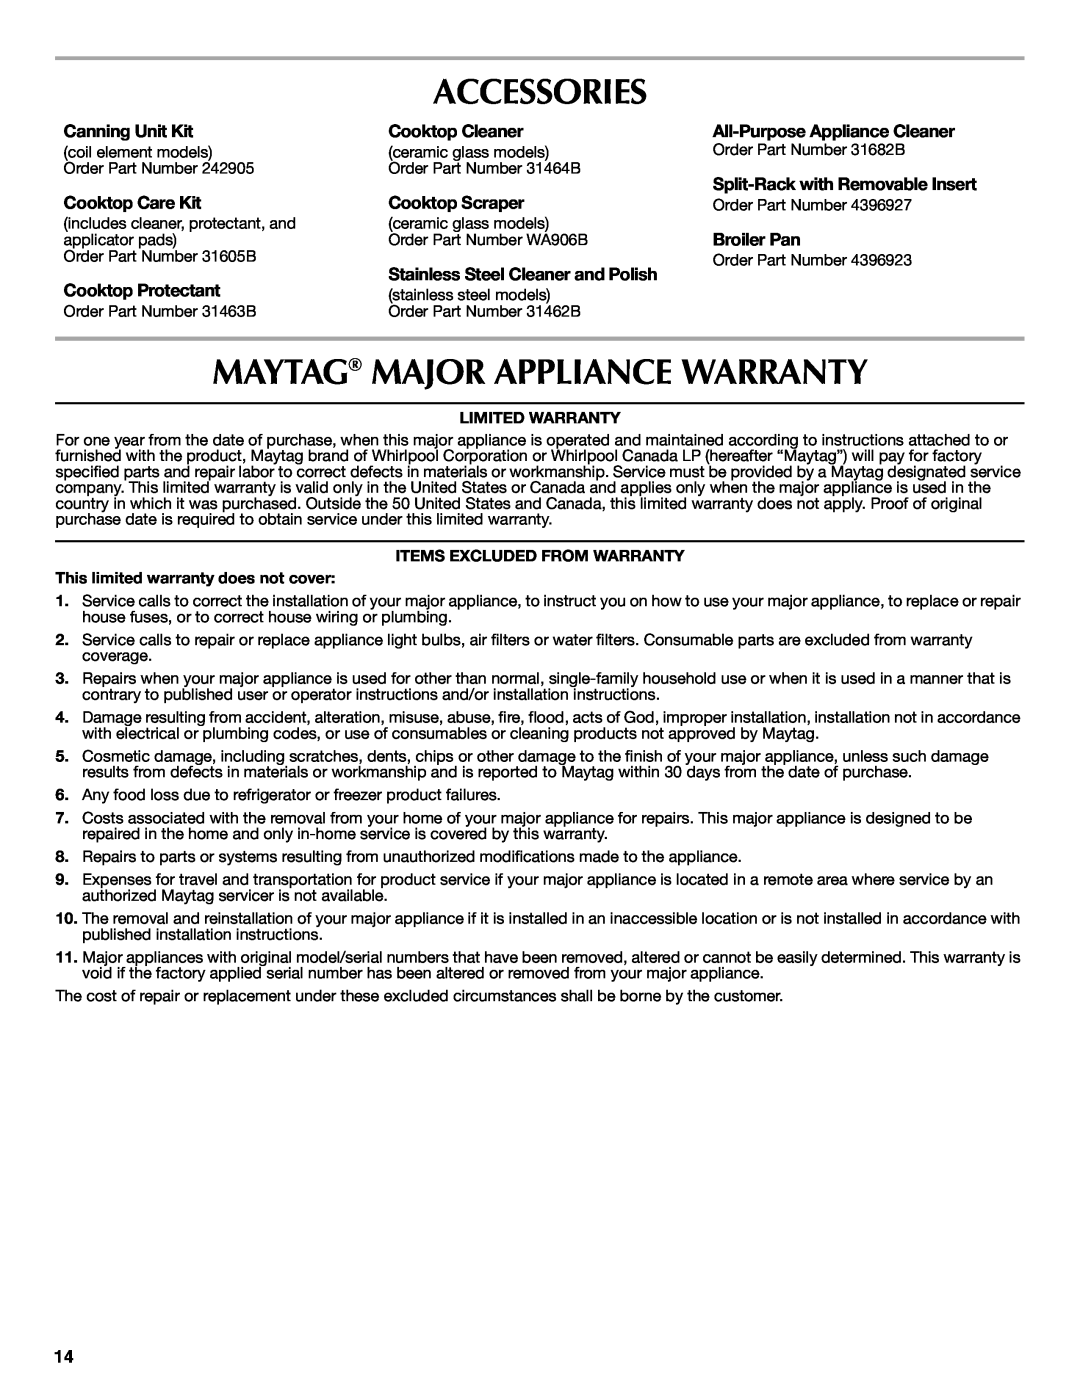 Maytag W10239461A Accessories, Maytag Major Appliance Warranty, Canning Unit Kit, Cooktop Cleaner, Cooktop Care Kit 